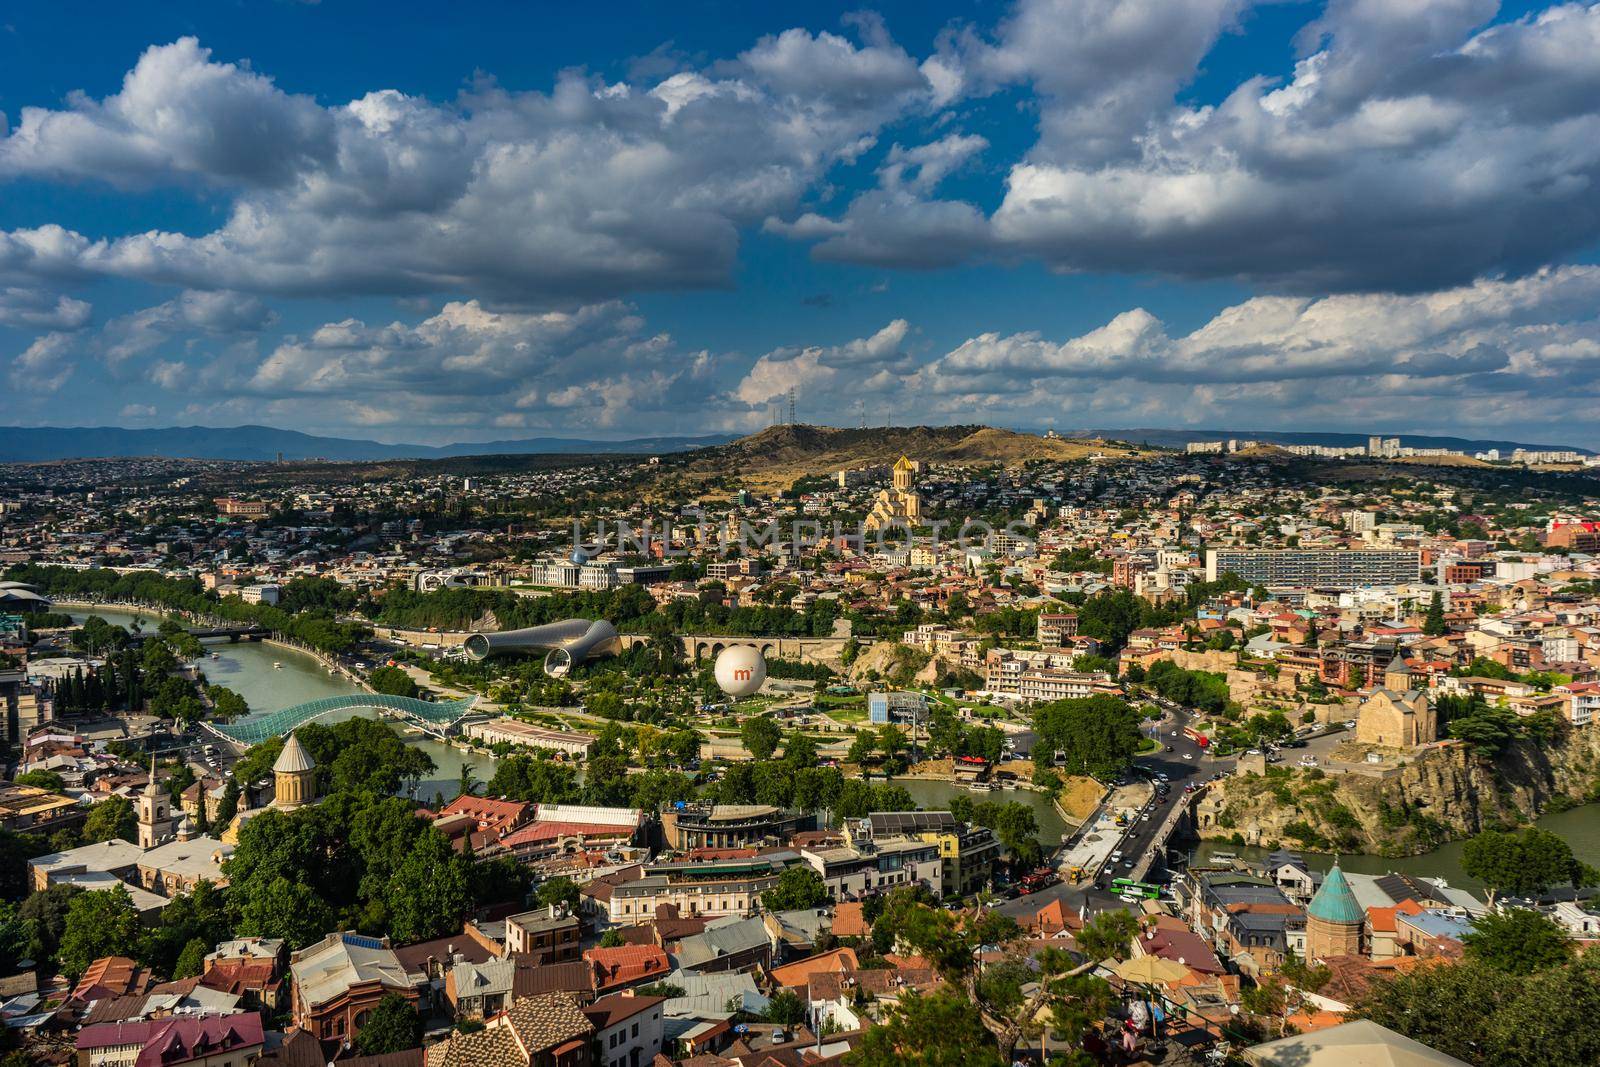 Tbilisi's cityscape with overview of Old town medieval architecture and Downtown with modern skyscarpers